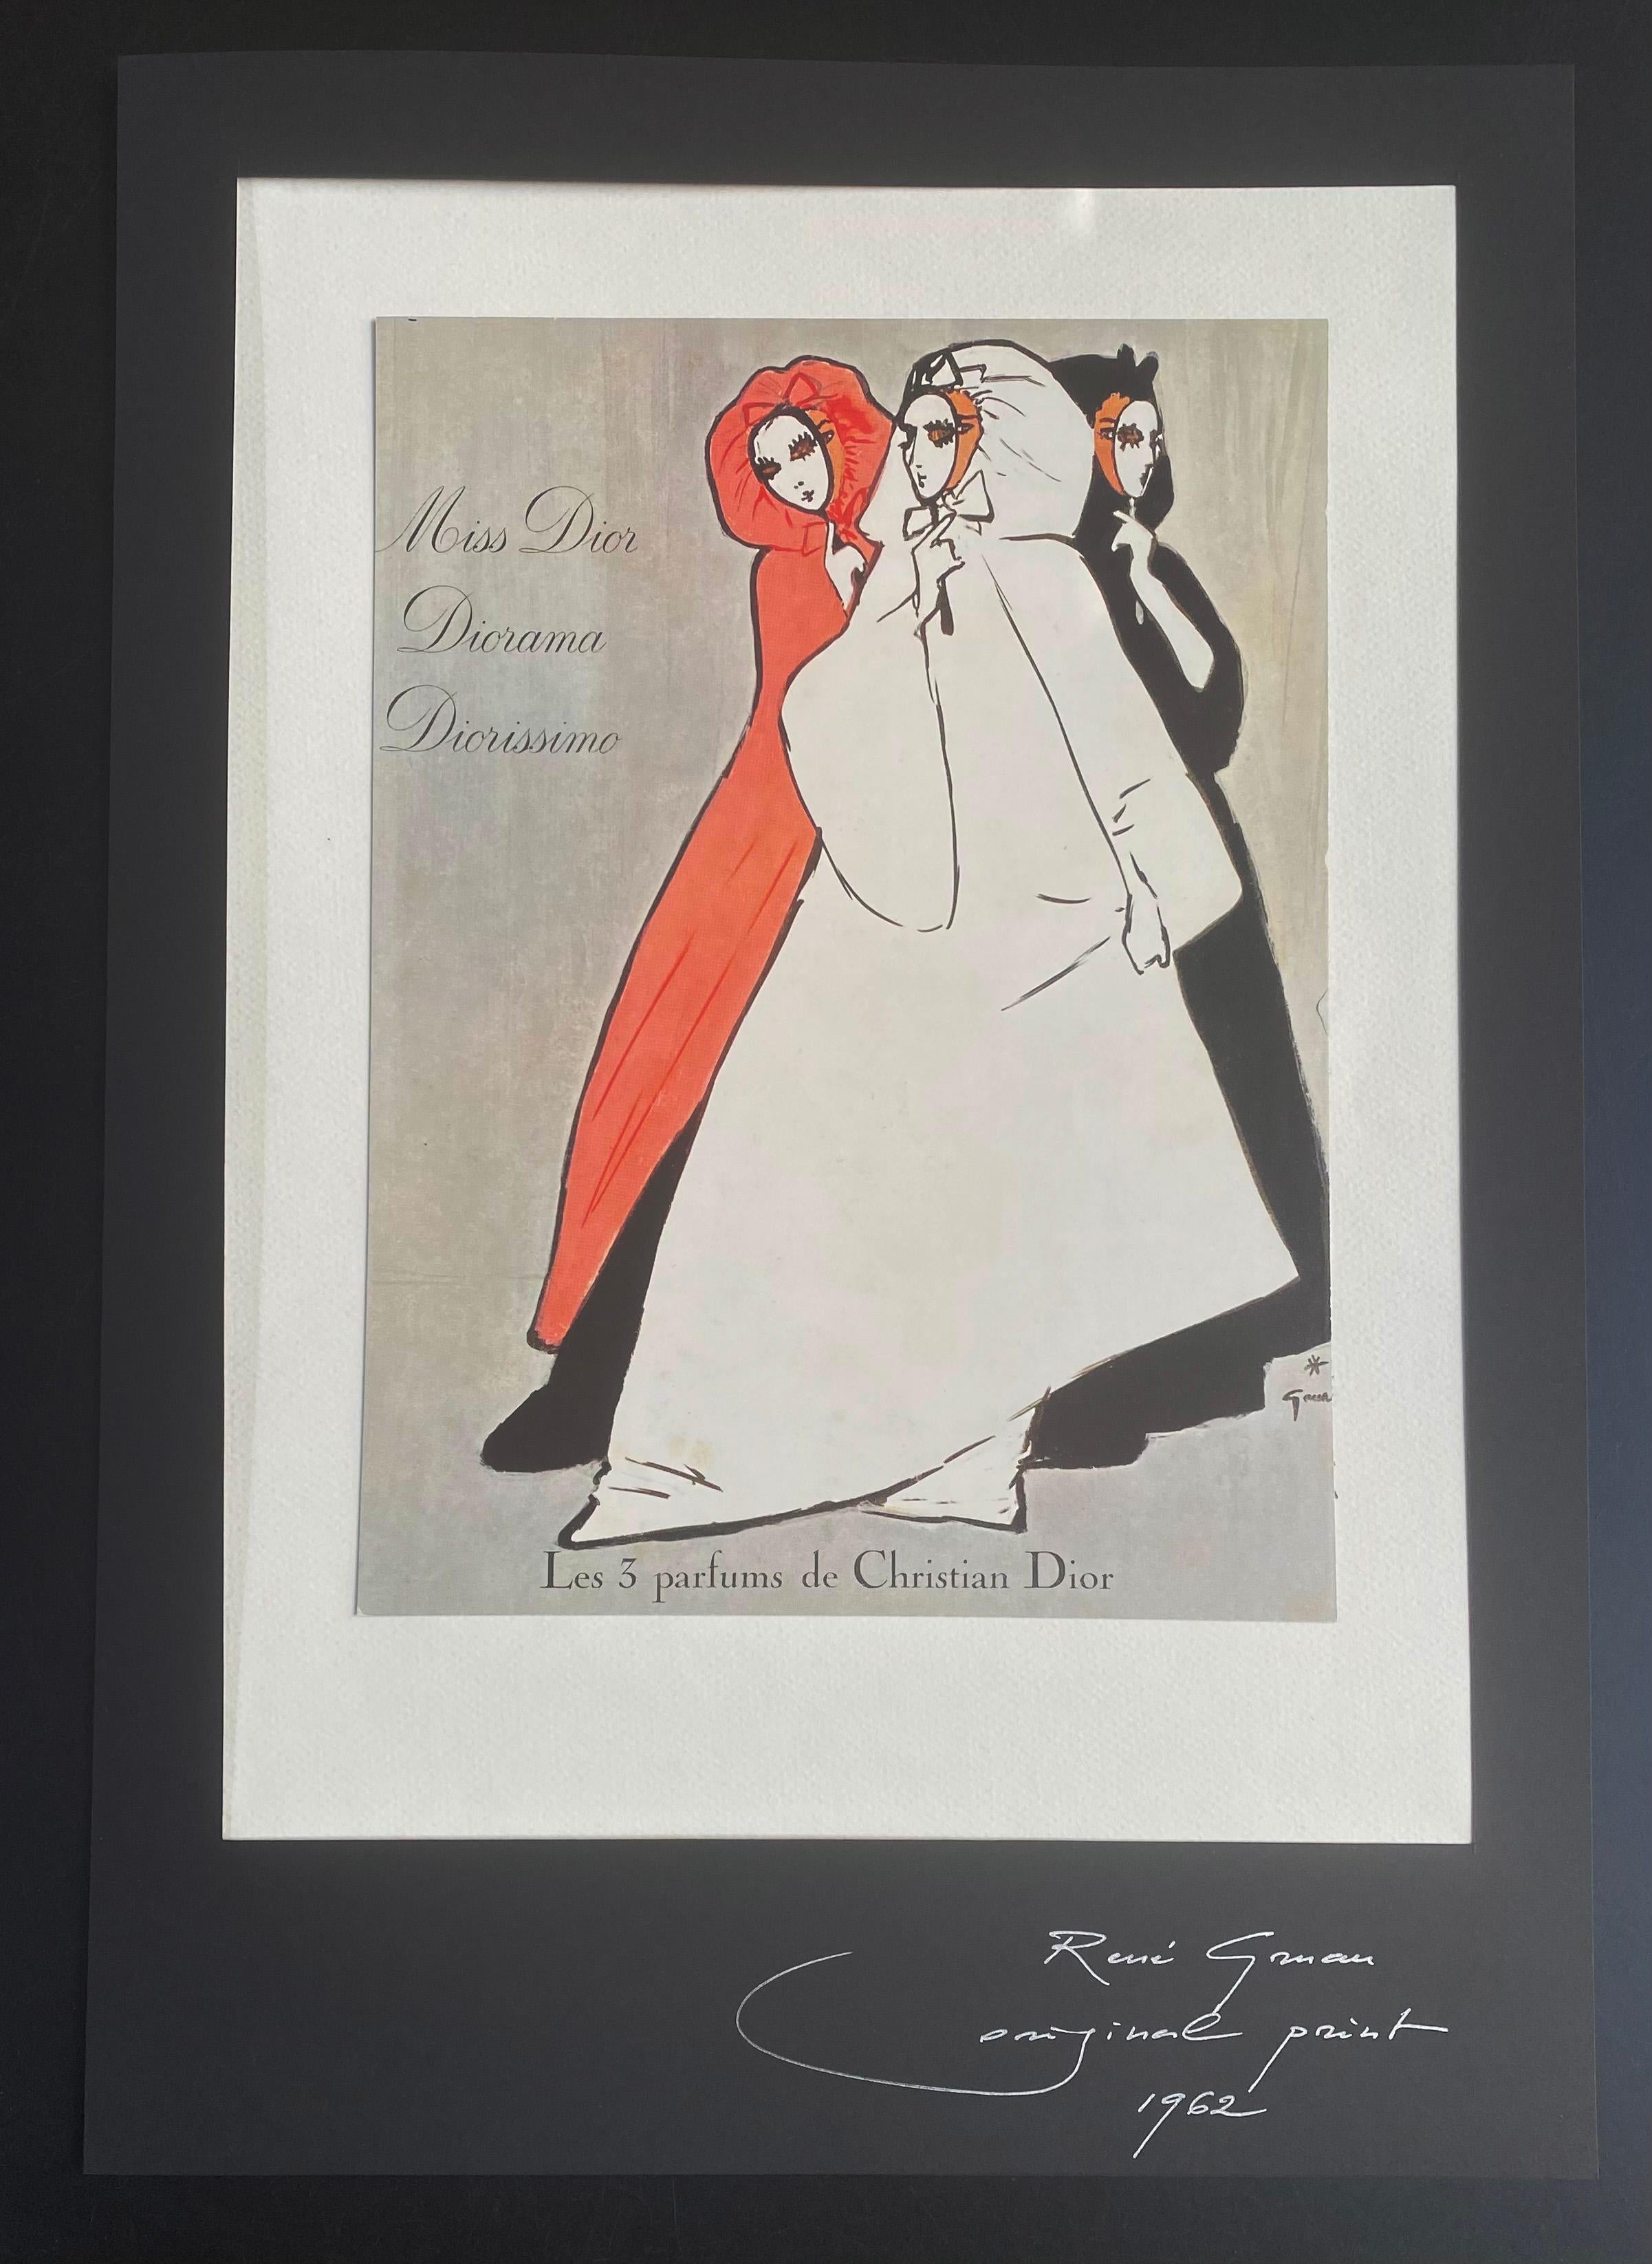 René Grau - Advertising illustration for Christian Dior.
Signed and dated lower right.
Original Print. 
1962.
Measures: Size with frame : 50 cm x 35 cm.
Size without frame : 43 cm x 31 cm.
190€.